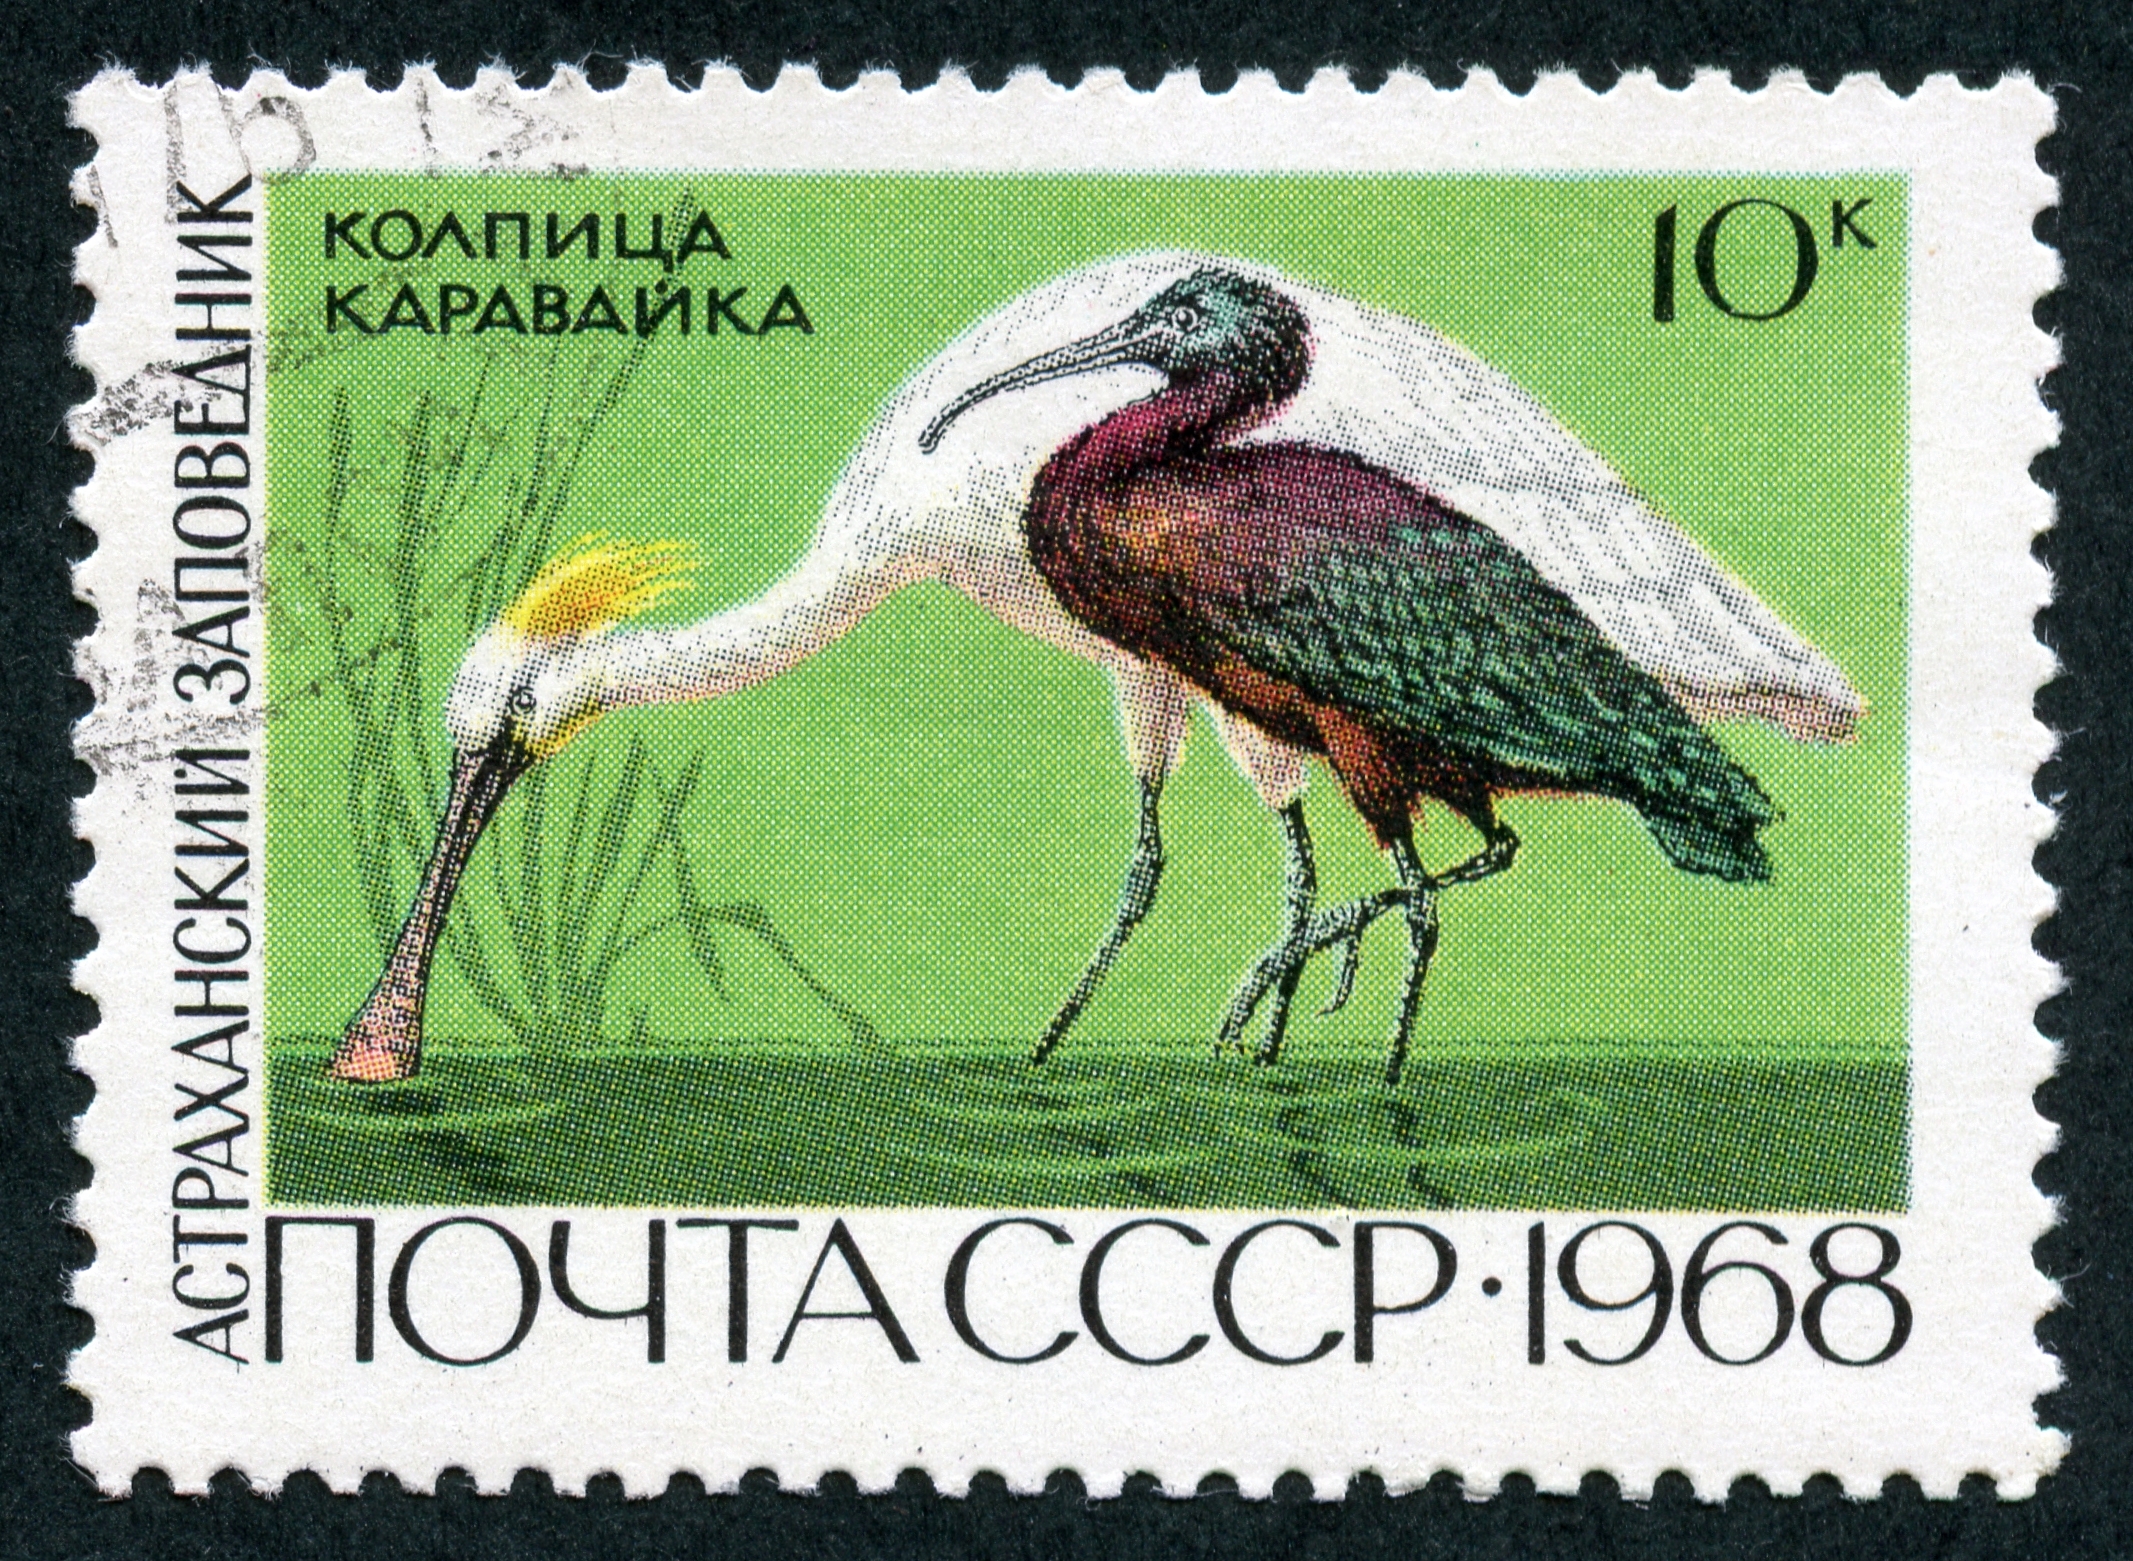 The Soviet Union 1968 CPA 3676 stamp (Eurasian Spoonbill and Glossy Ibis (Astrakhan Nature Reserve)) cancelled